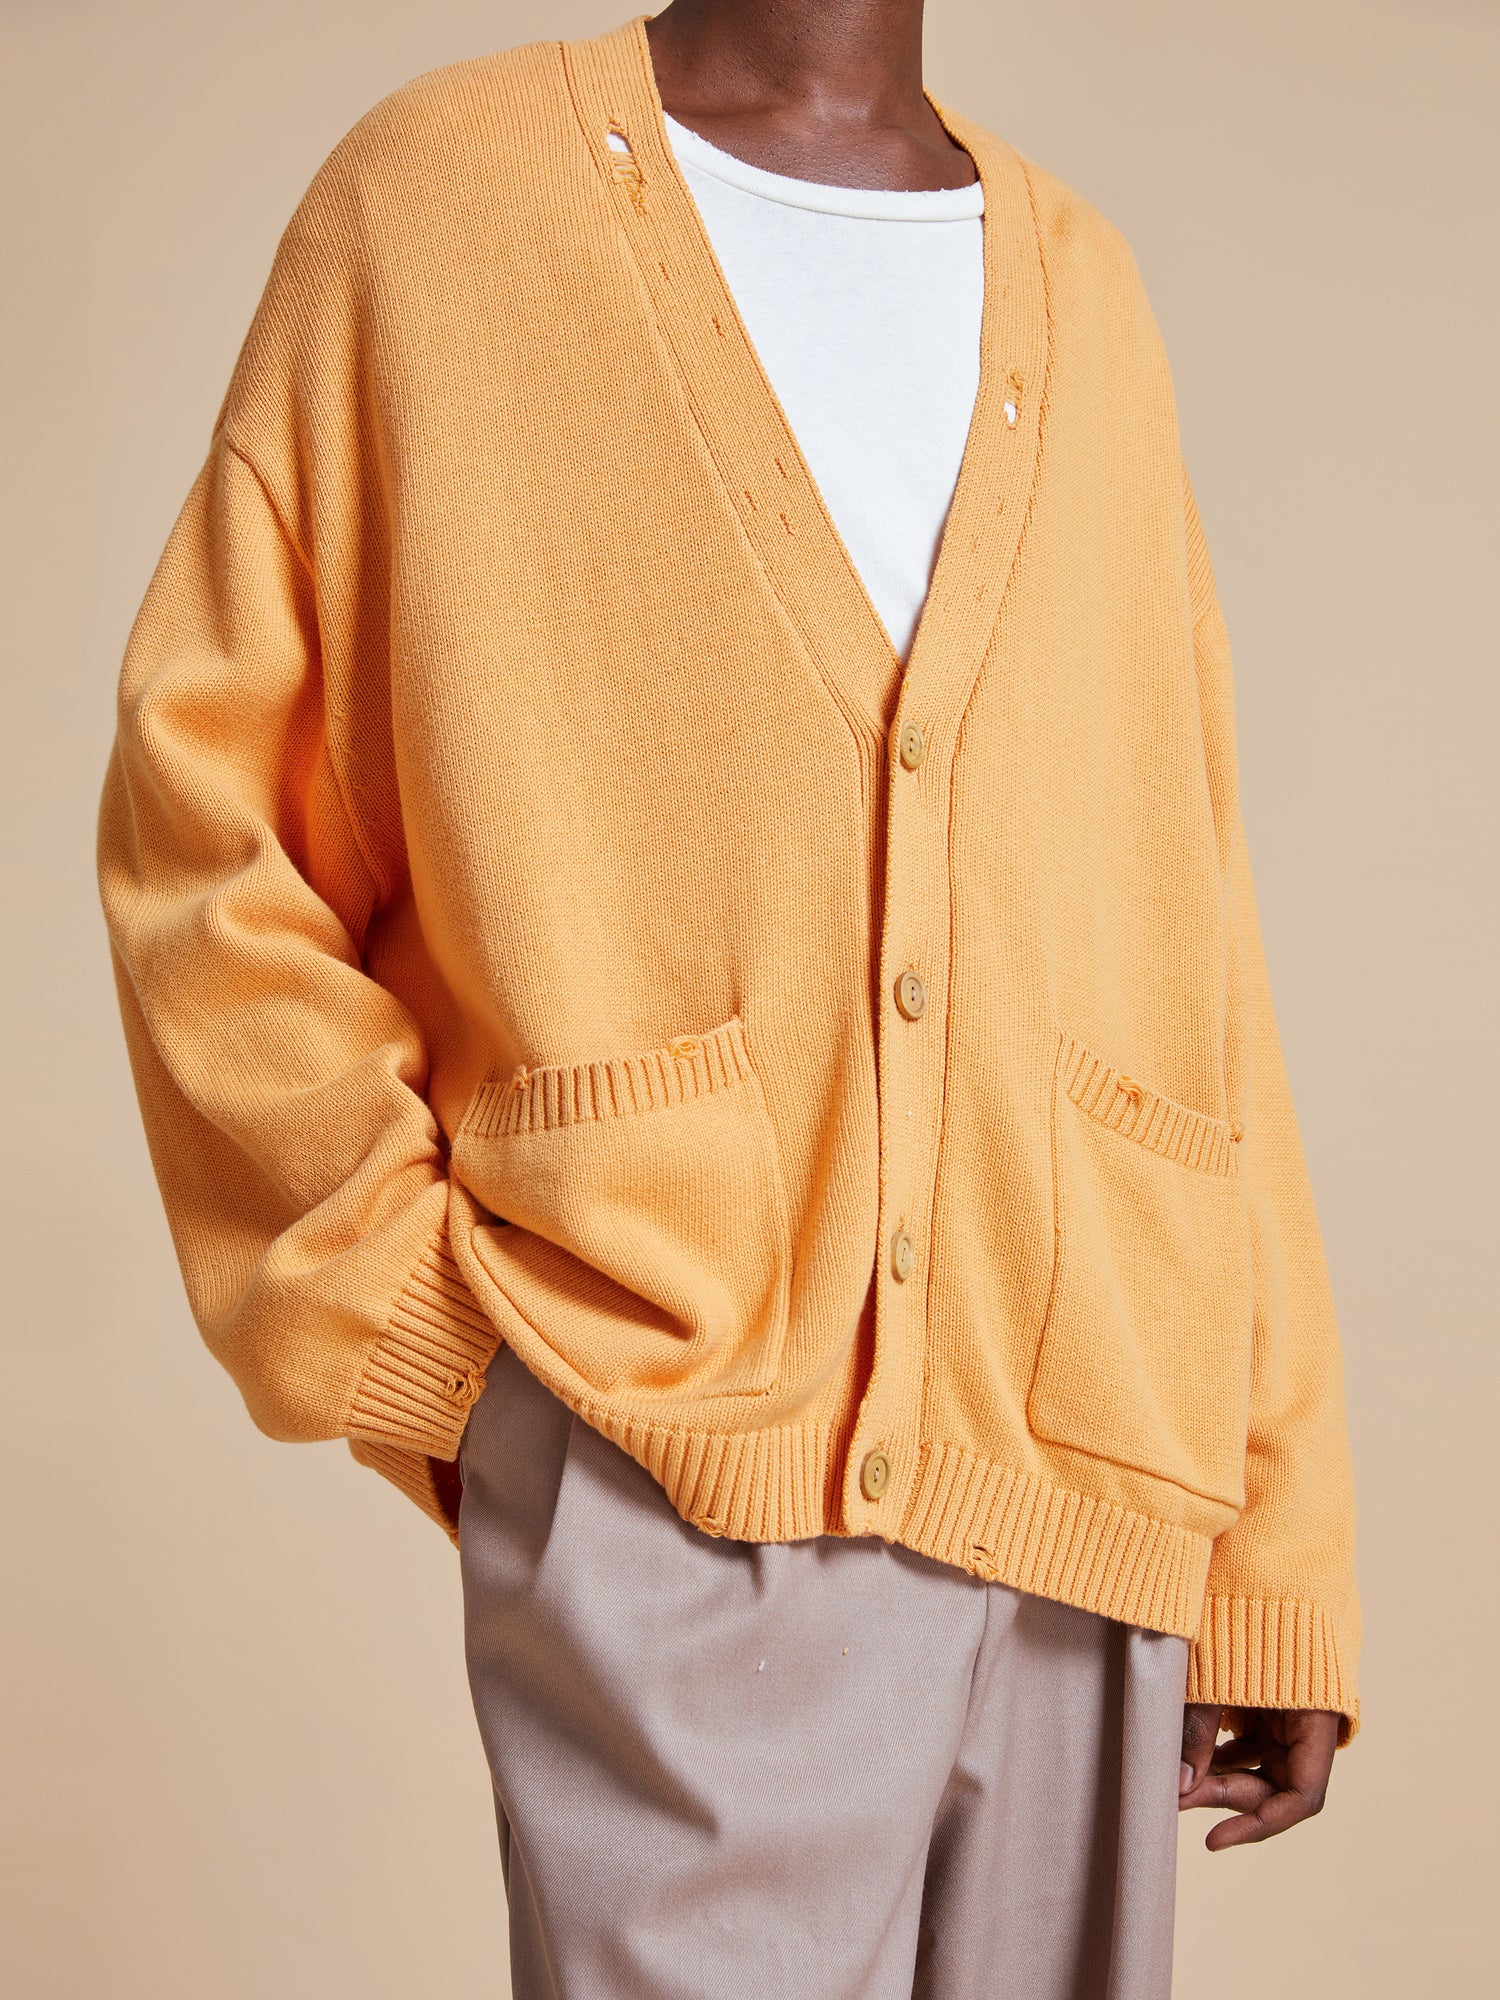 The model is wearing a yellow Found Cadmium Distressed Cardigan sweater.